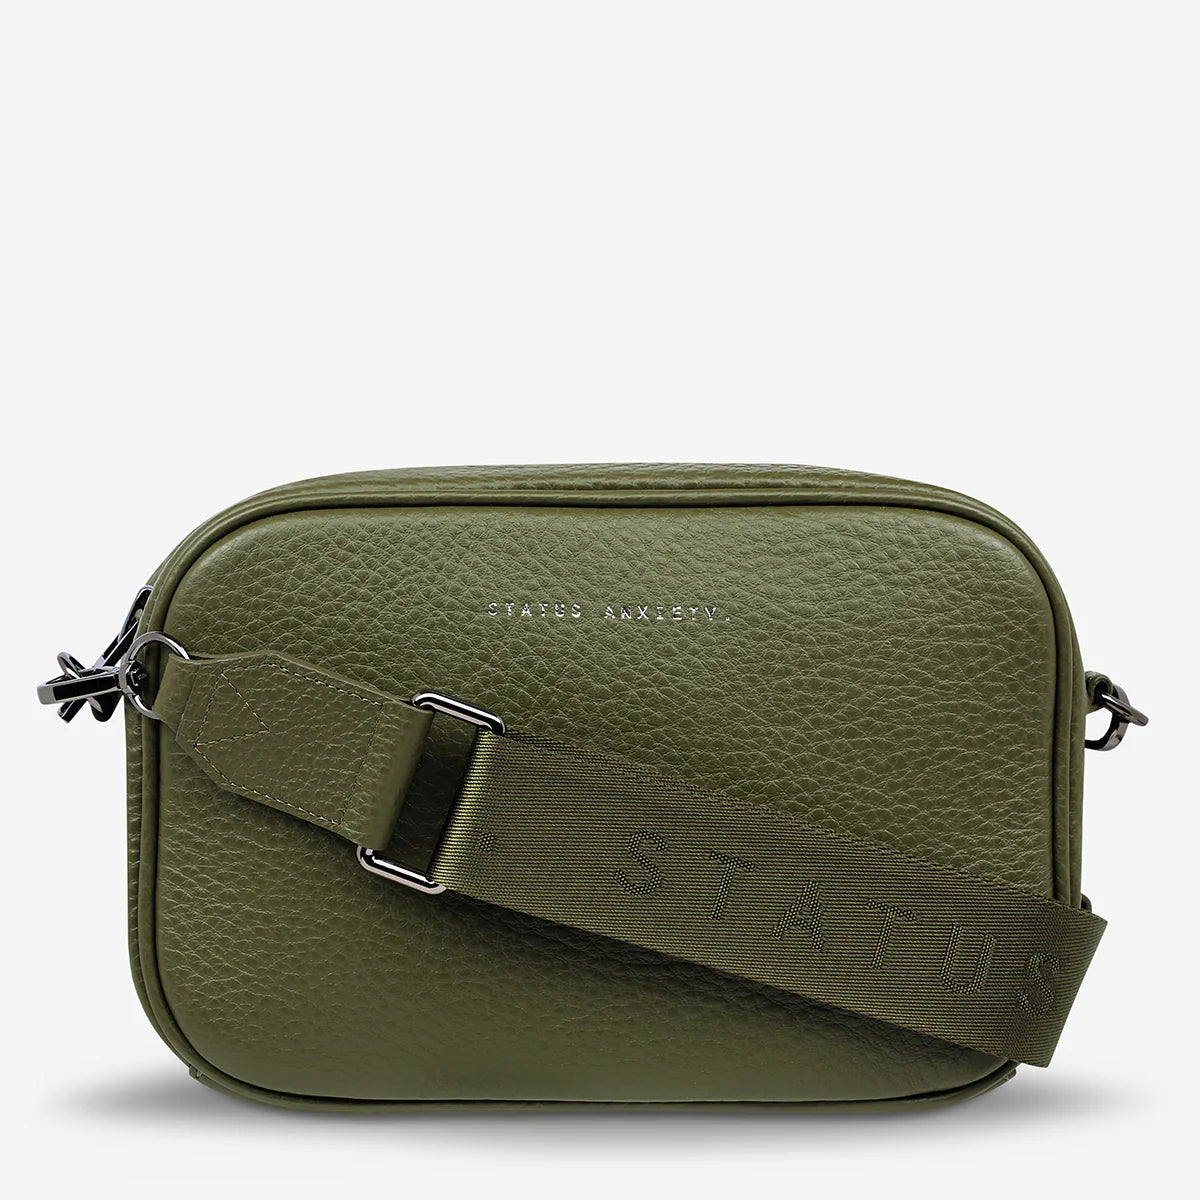 STATUS ANXIETY // Plunder With Webbed Strap Bag KHAKI